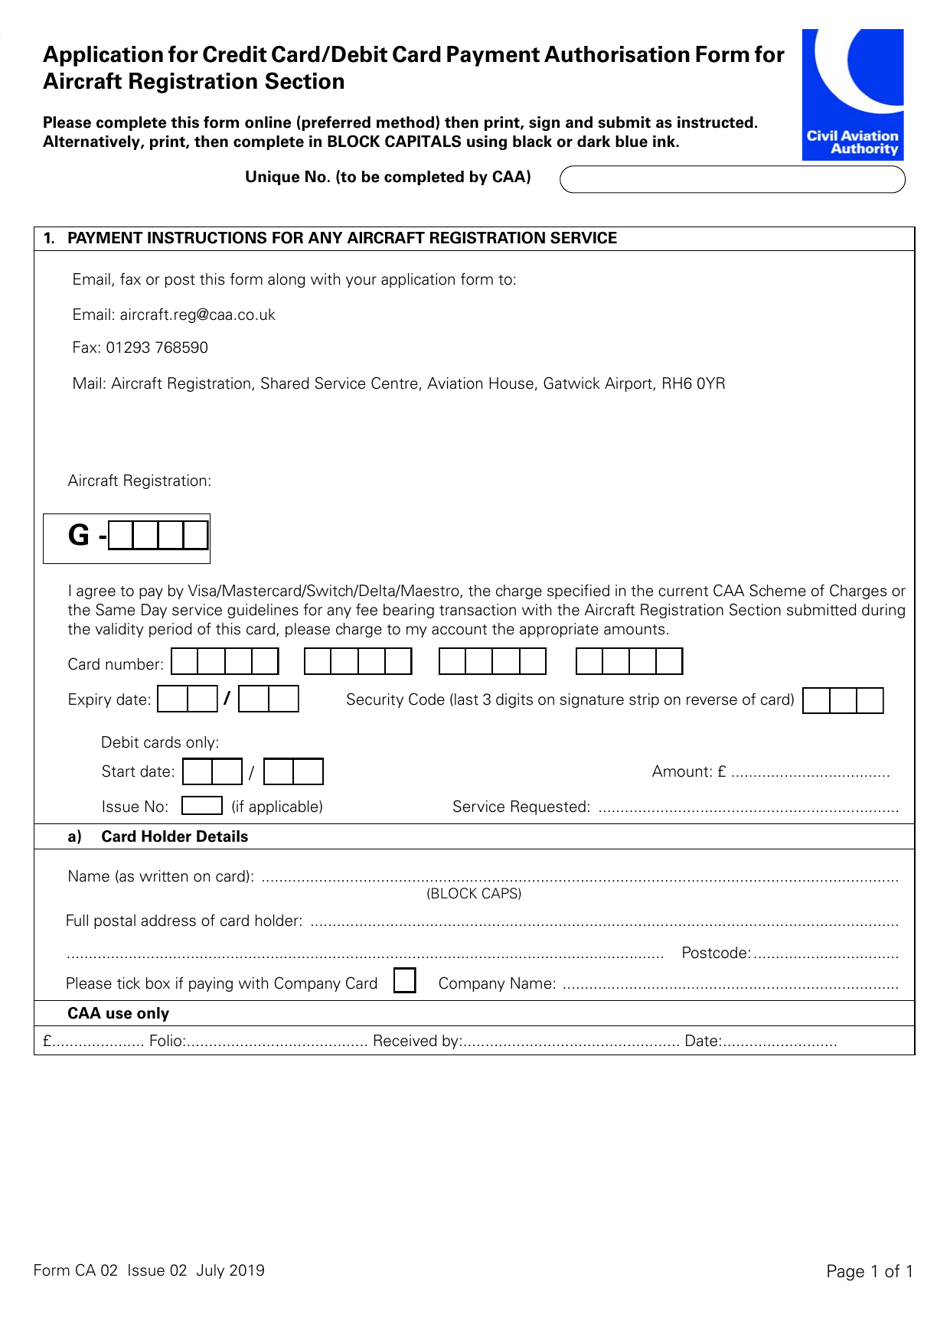 Form CA02 Application for Credit Card / Debit Card Payment Authorisation Form for Aircraft Registration Section - United Kingdom, Page 1